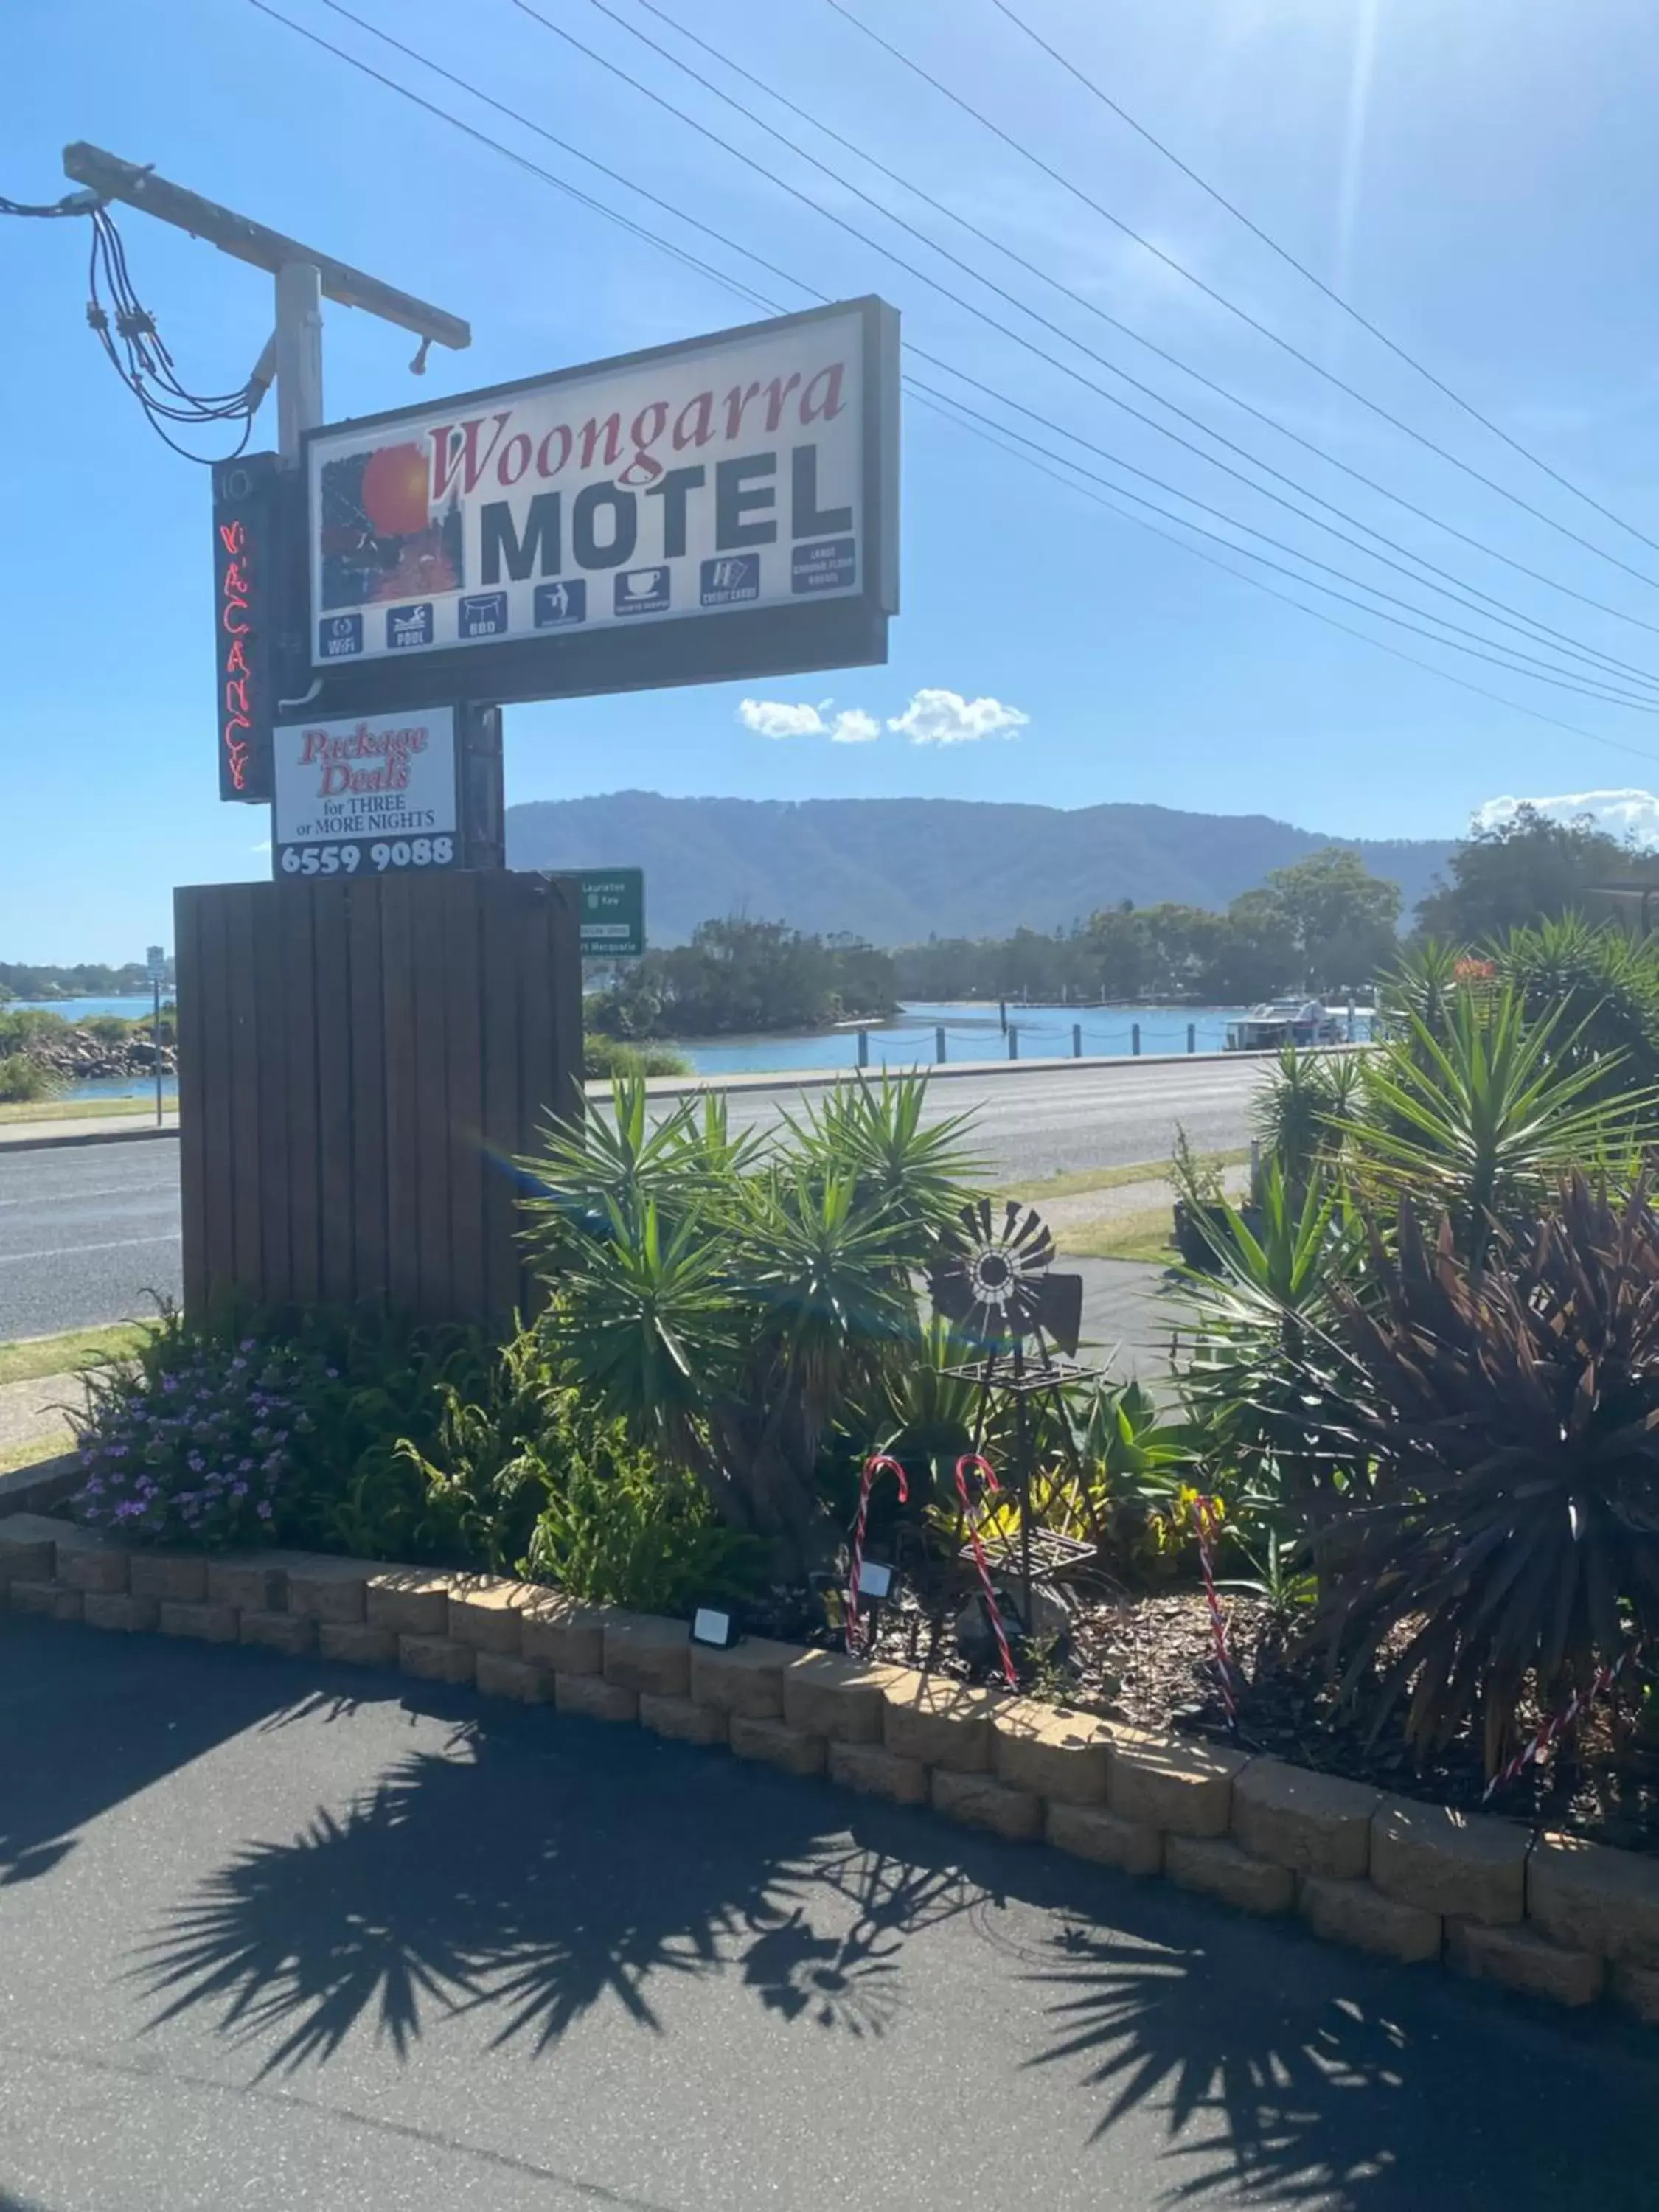 Property building in Woongarra Motel